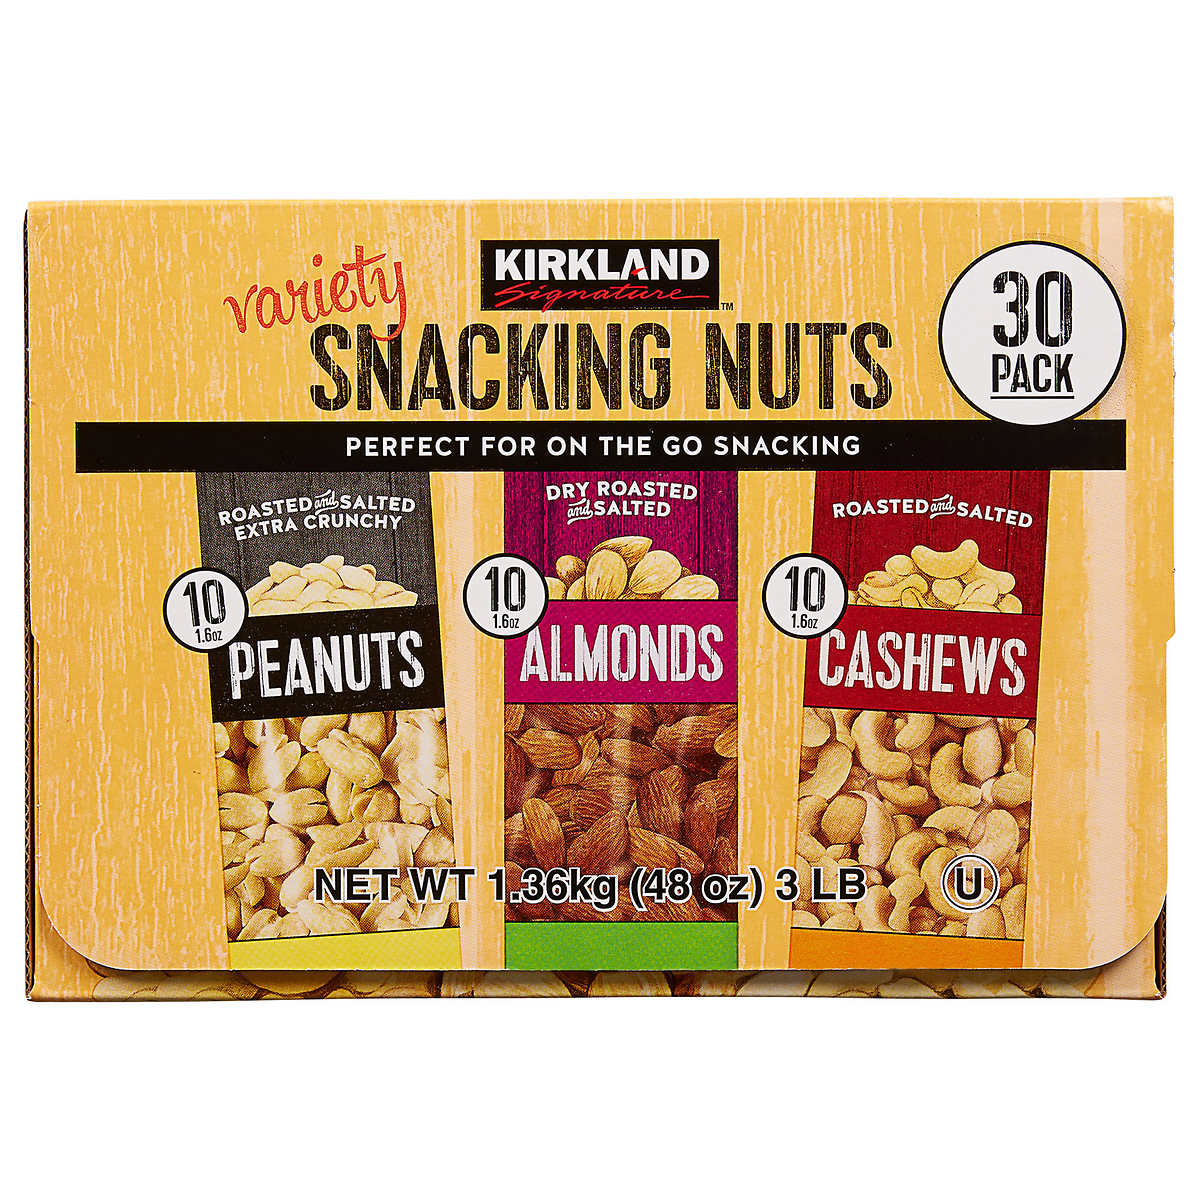 Kirkland Signature Snacking Nuts, Variety Pack, 1.6 Oz, 30-count